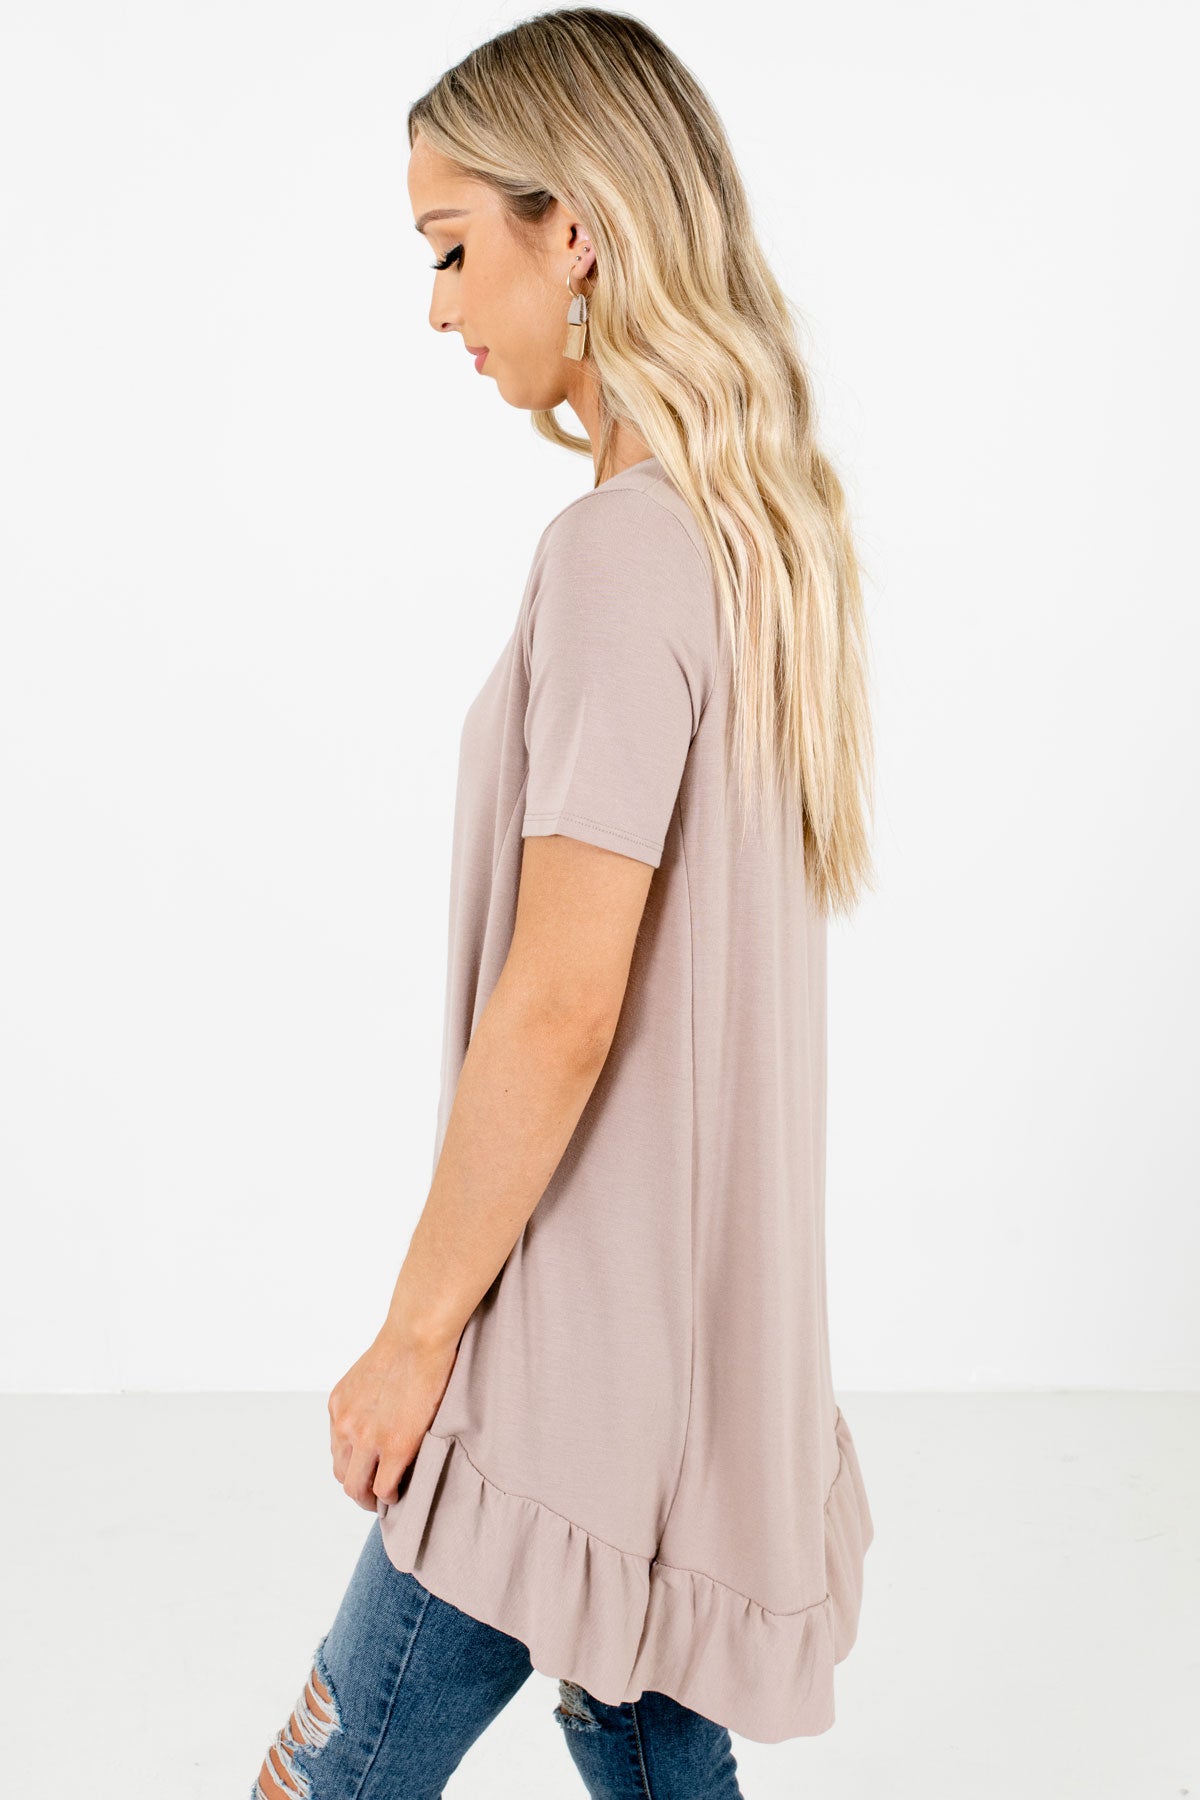 Women's Taupe Brown Casual Everyday Boutique Tops